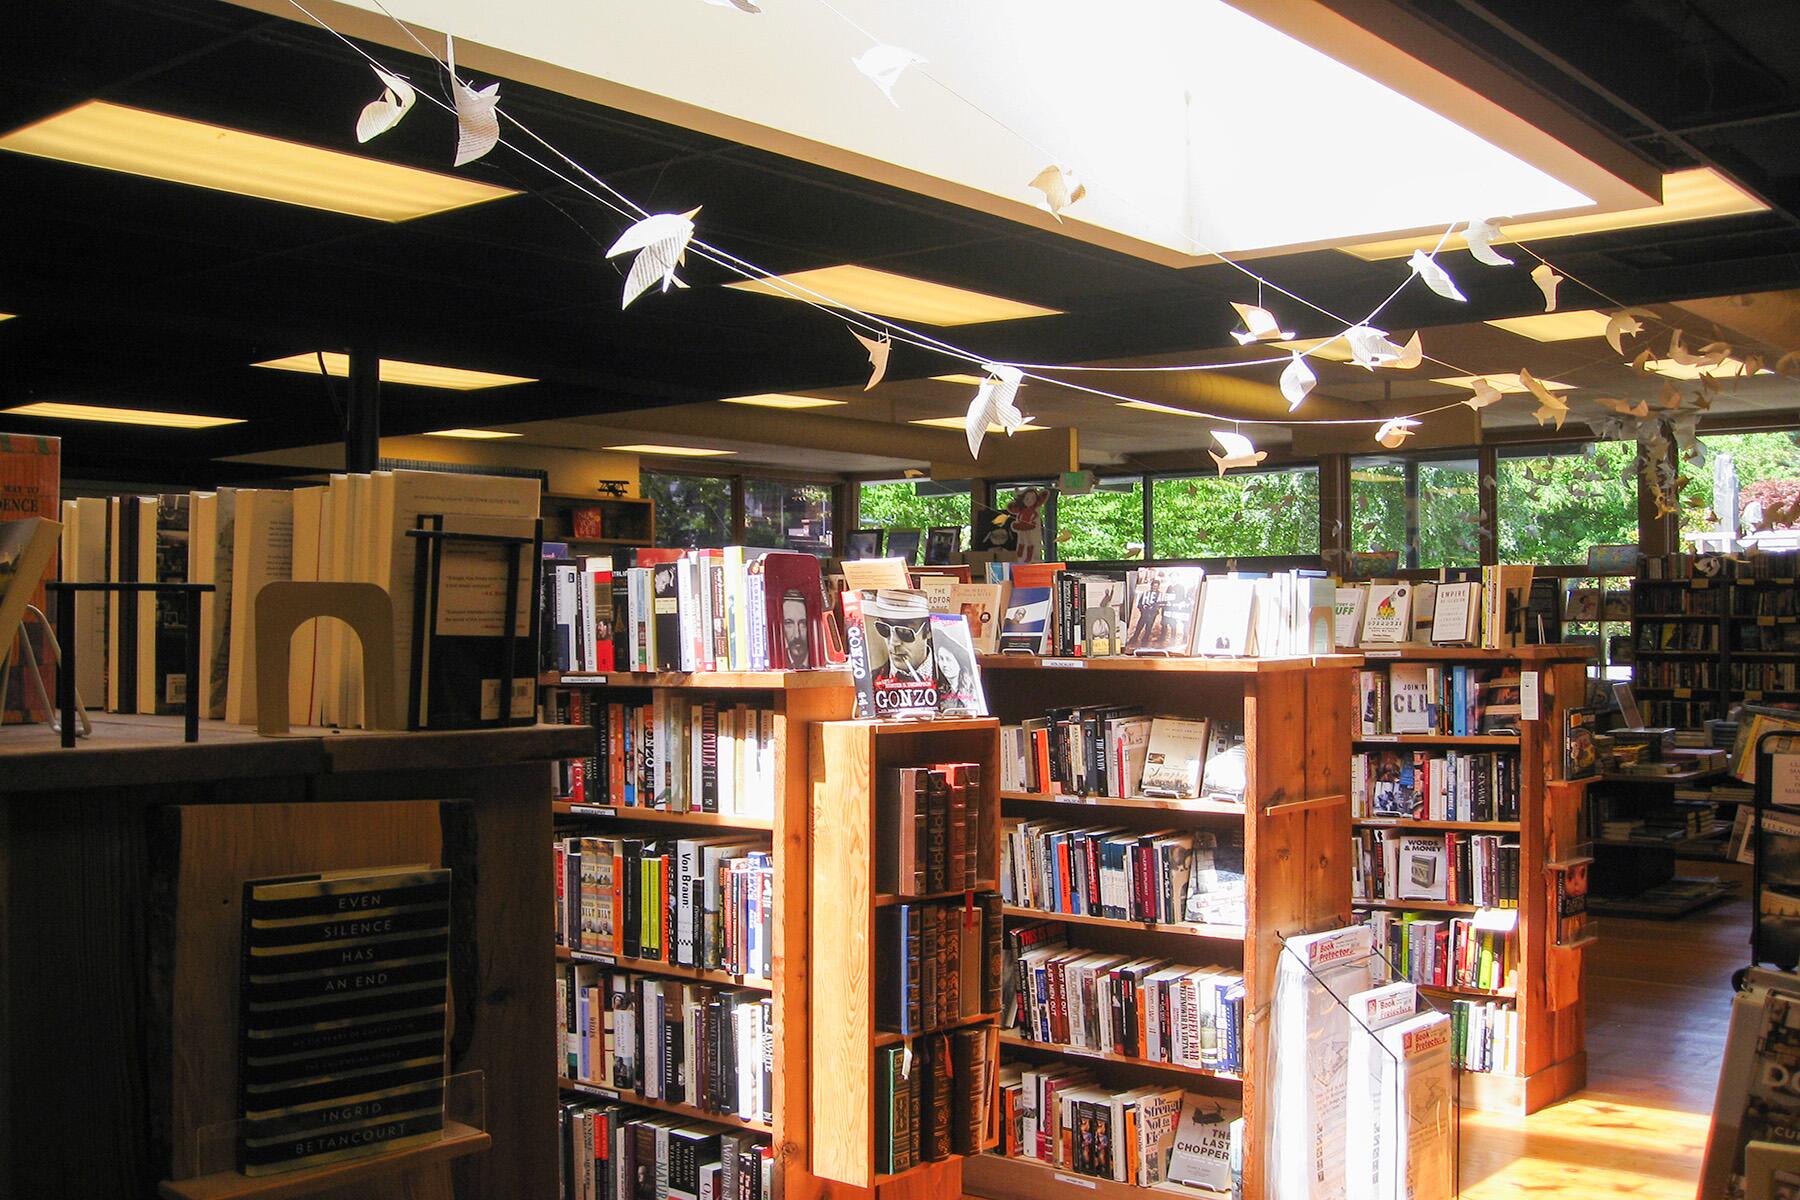 <a href='https://www.fodors.com/world/north-america/usa/washington/seattle/experiences/news/photos/a-book-lovers-guide-to-seattles-best-bookstores#'>From &quot;The 10 Best Bookstores in Seattle: Third Place Books&quot;</a>